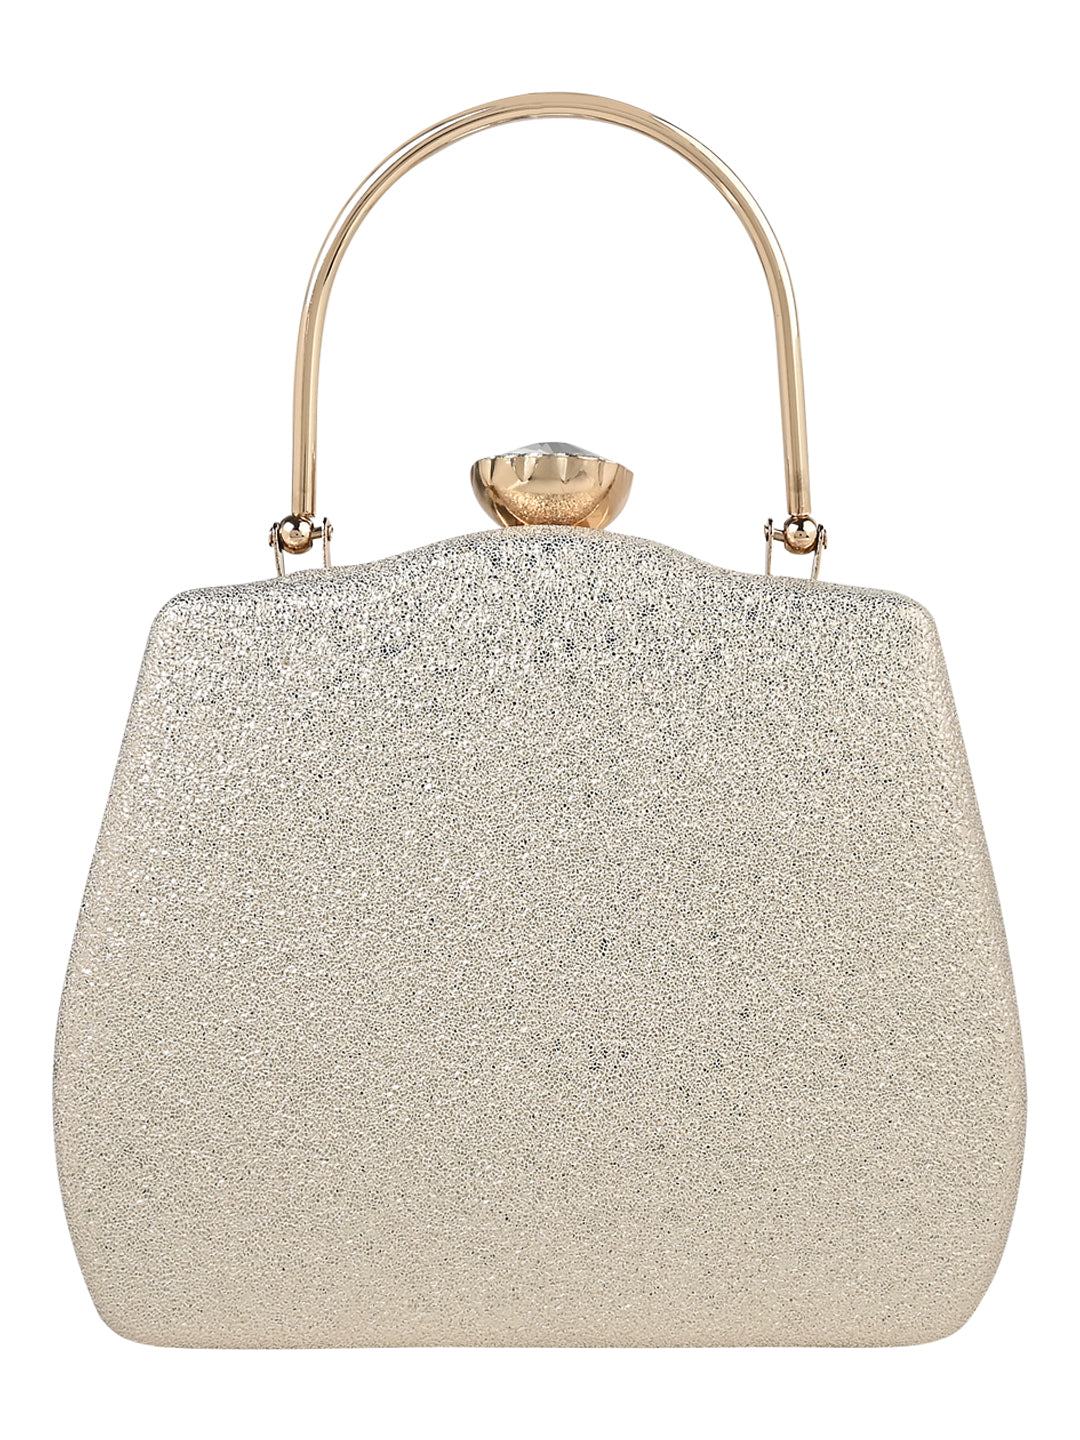 A white clutch with a Vdesi plain gold clutch handle.